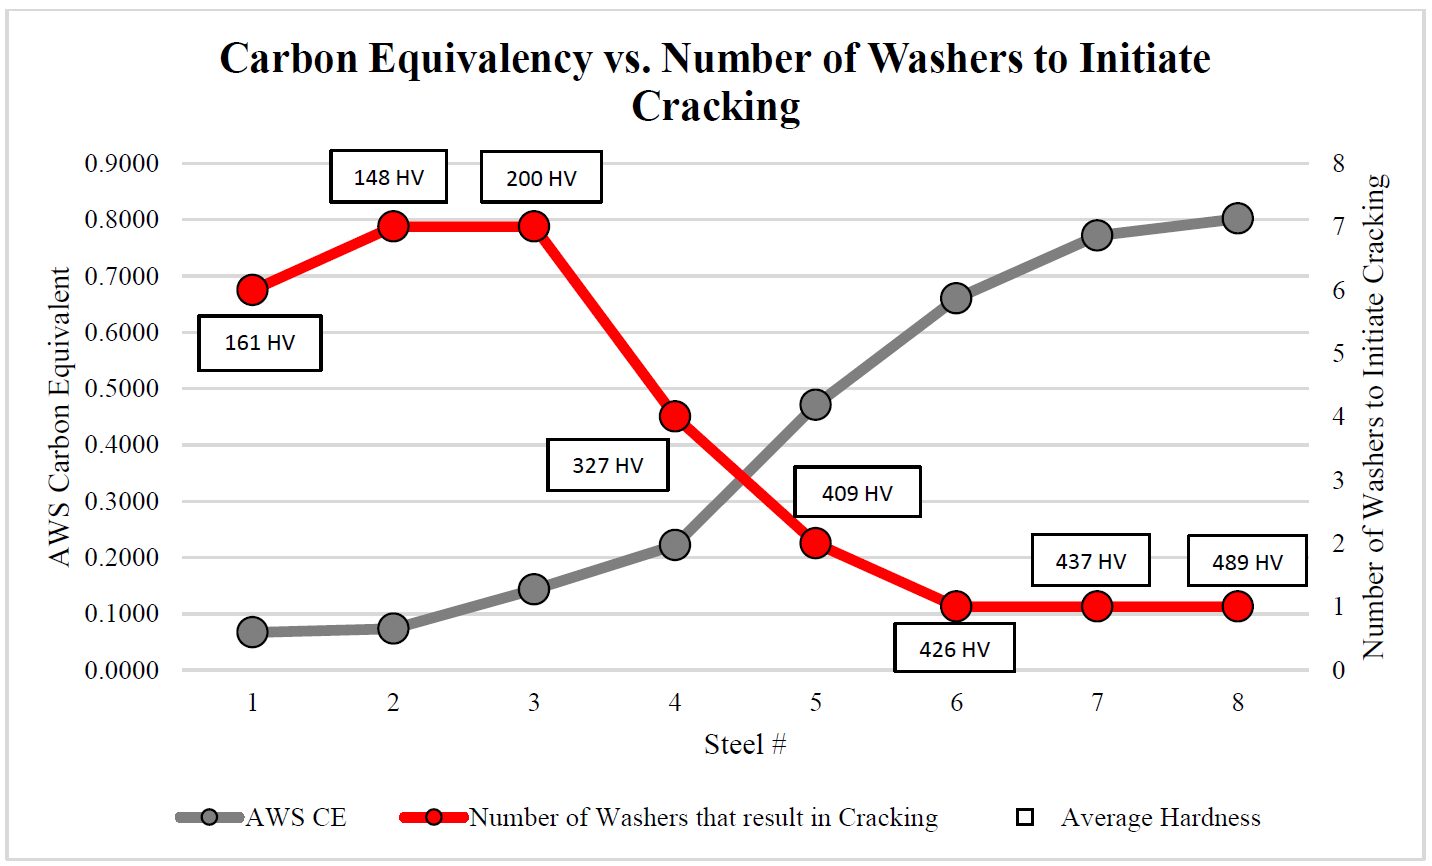 Figure 9: Carbon Equivalency vs. Number of Washers to Initiate Cracking